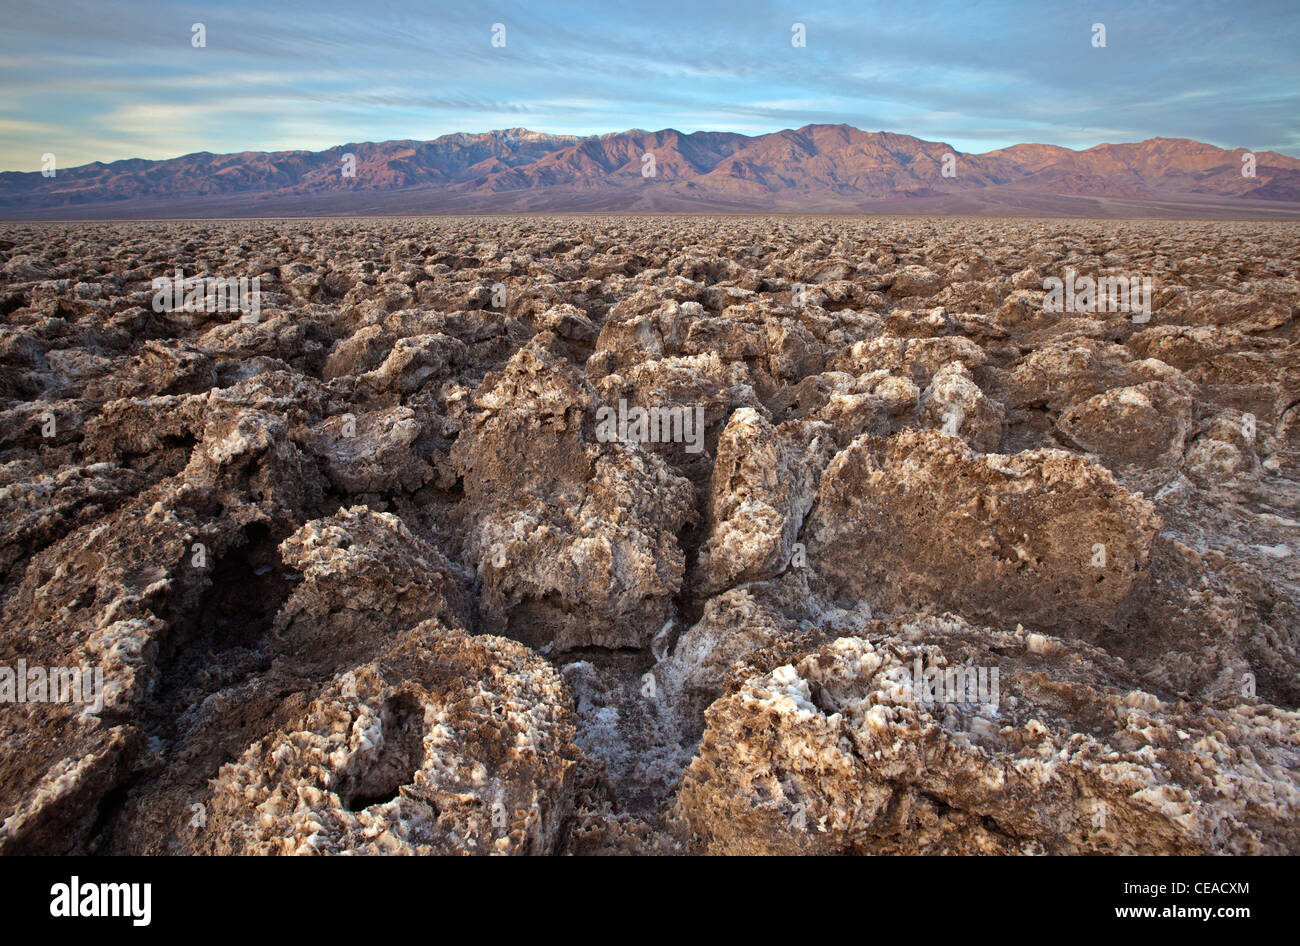 Devil's Golf Course at Death Valley National Park, California, USA Stock Photo